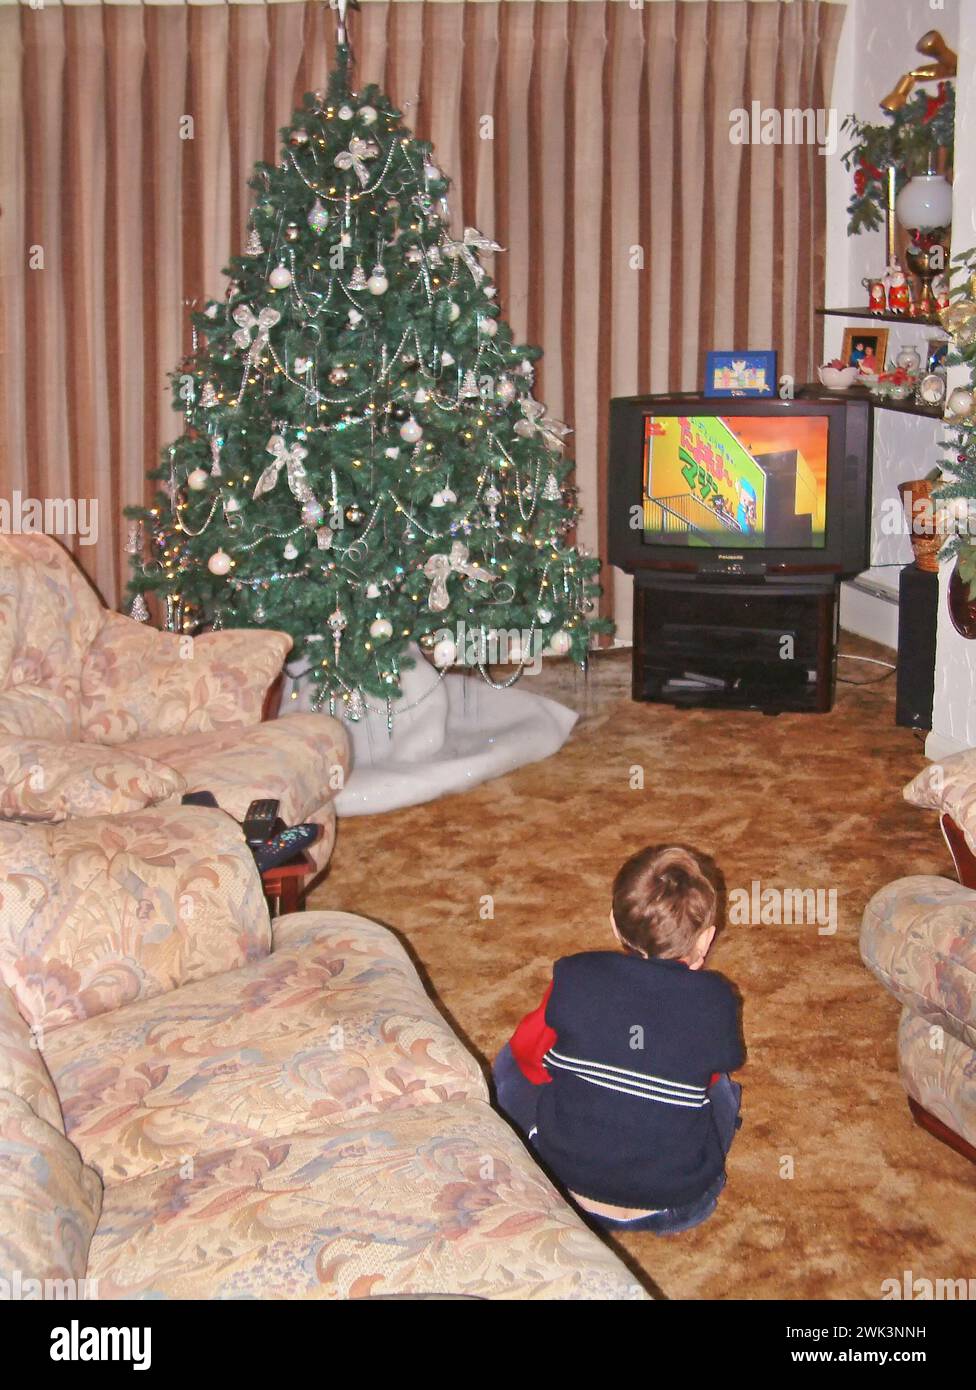 1990s three year old boy historical archive back view image watching TV old fashioned coloured television screen beside decorated Christmas tree sitting on carpet in 90s furnished house living room with curtains drawn Essex England UK Stock Photo